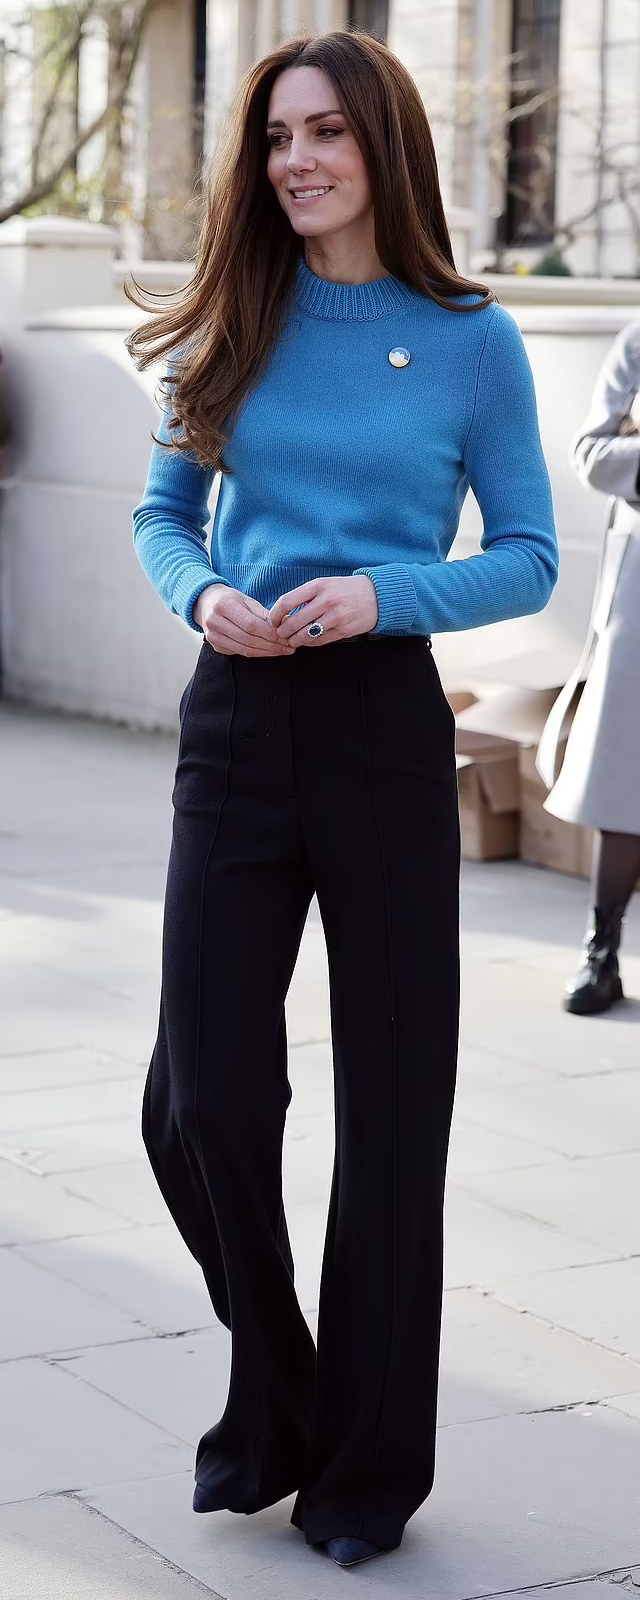 Alexander McQueen Cashmere Sweater in Blue as seen on Kate Middleton, The Duchess of Cambridge.